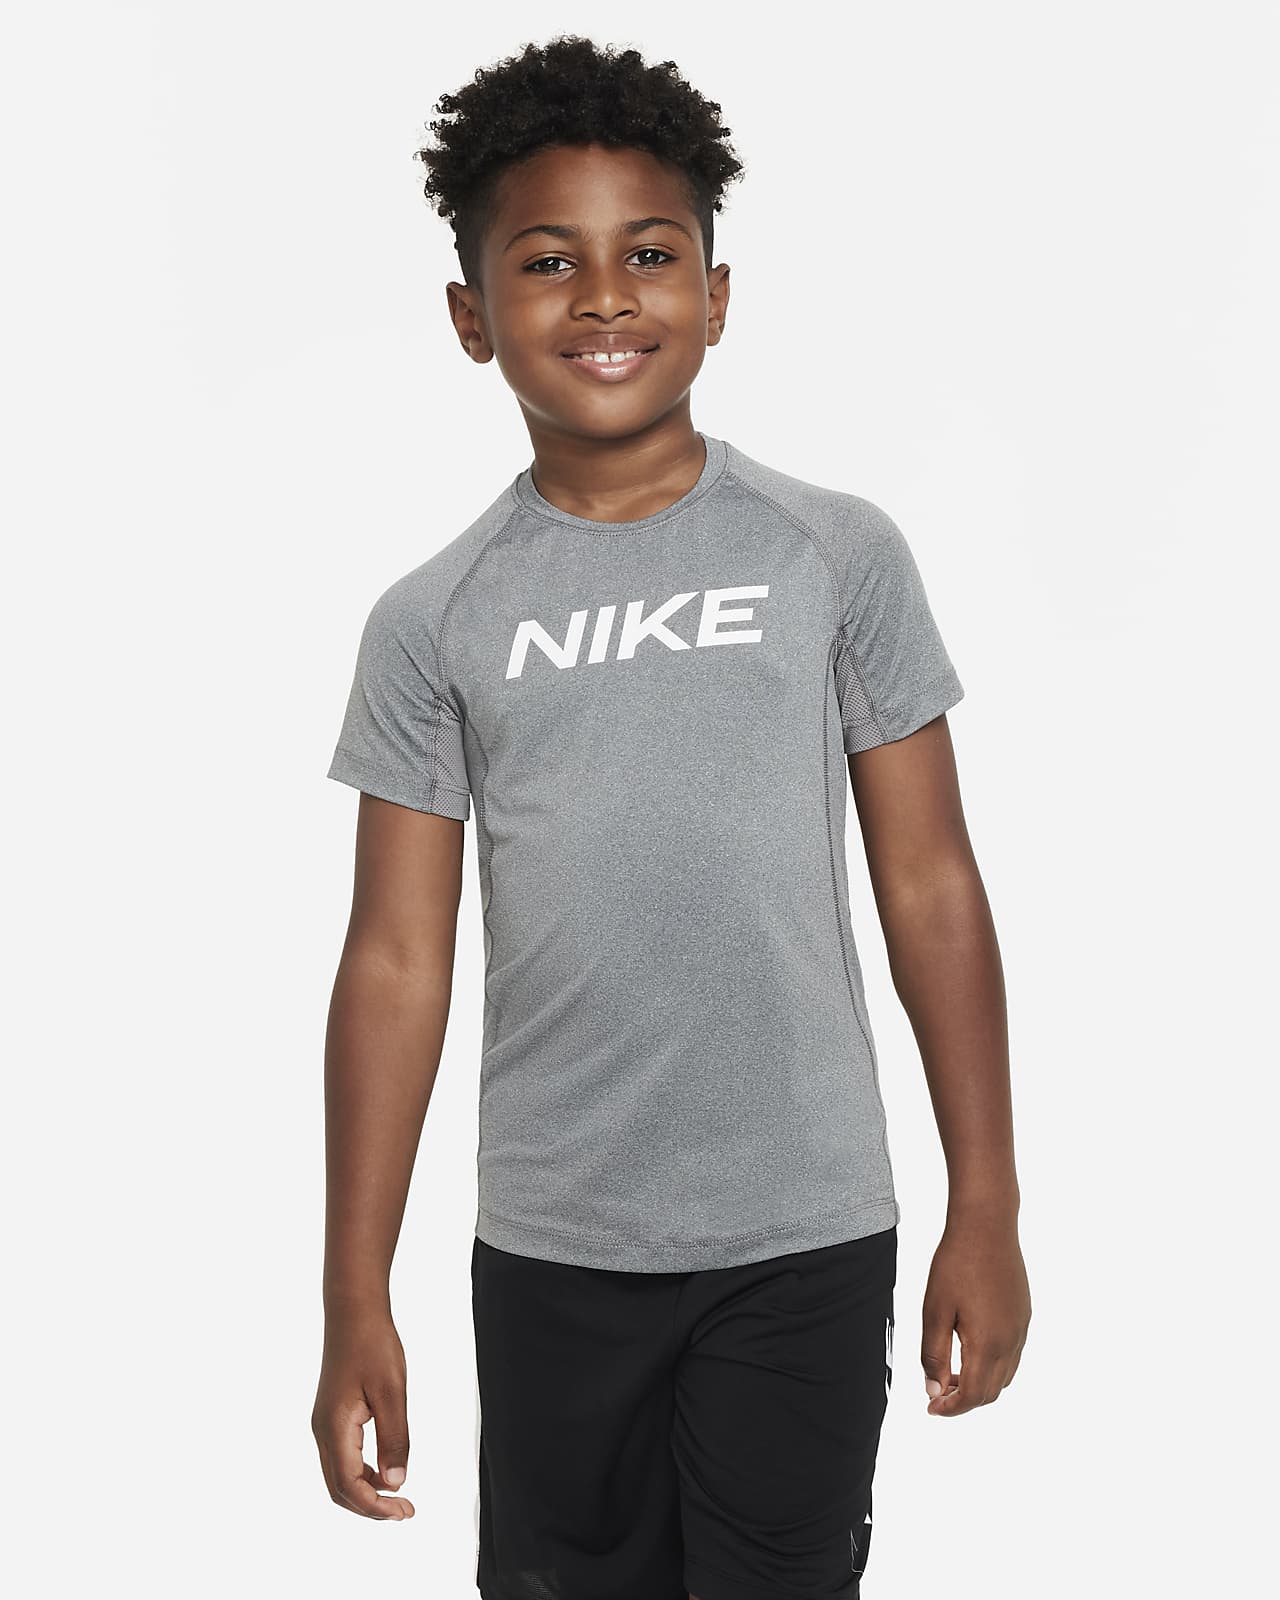 Toddler Boys Short Sleeve Tops On Purchases